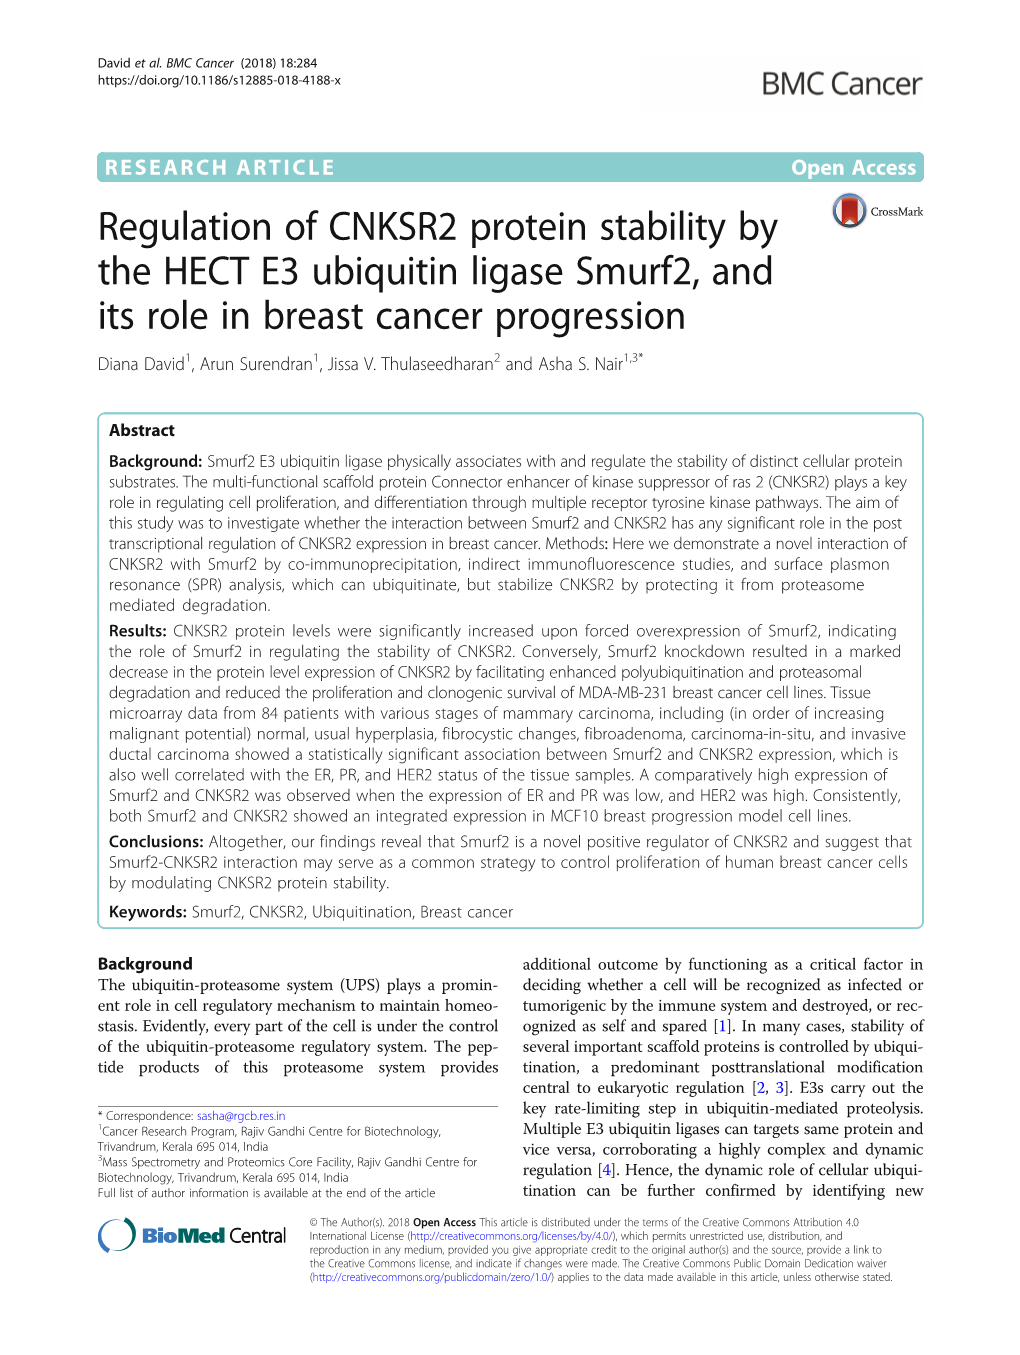 Regulation of CNKSR2 Protein Stability by the HECT E3 Ubiquitin Ligase Smurf2, and Its Role in Breast Cancer Progression Diana David1, Arun Surendran1, Jissa V